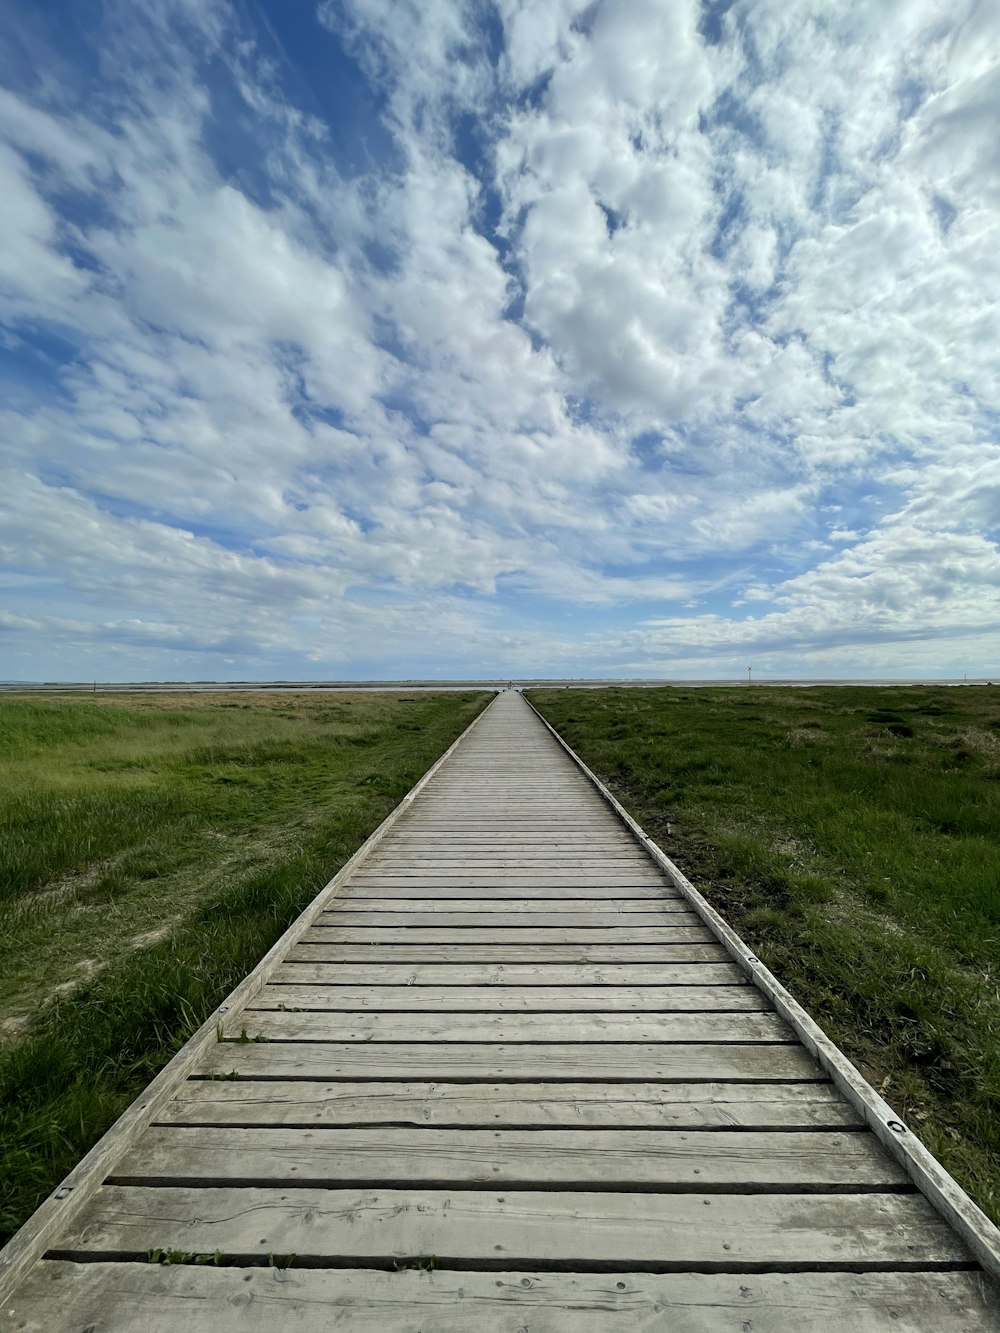 brown wooden pathway between green grass field under blue and white cloudy sky during daytime